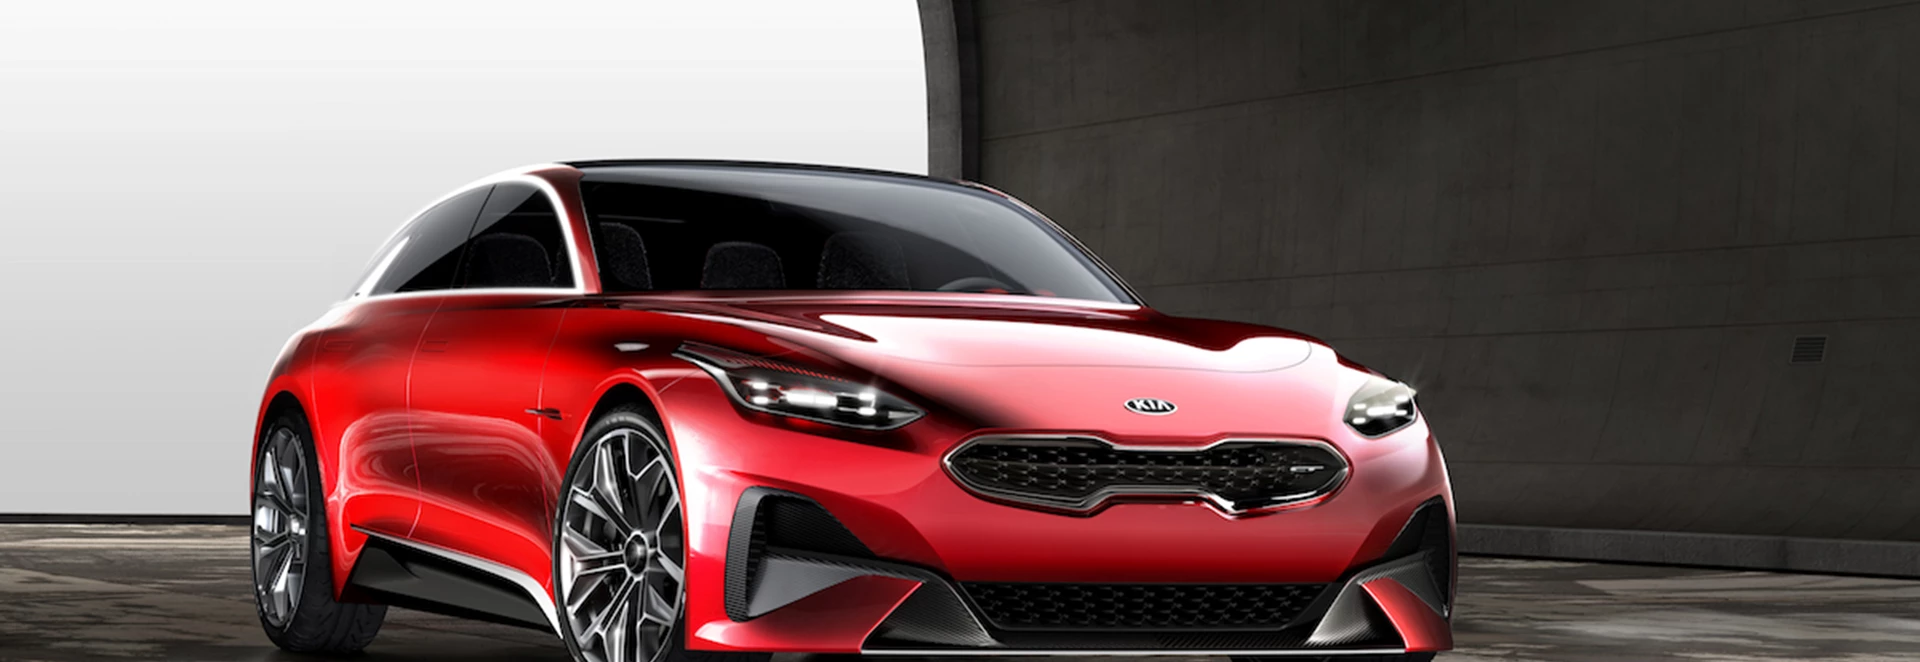 The Kia Proceed Concept is a stunning “extended hot hatch” 